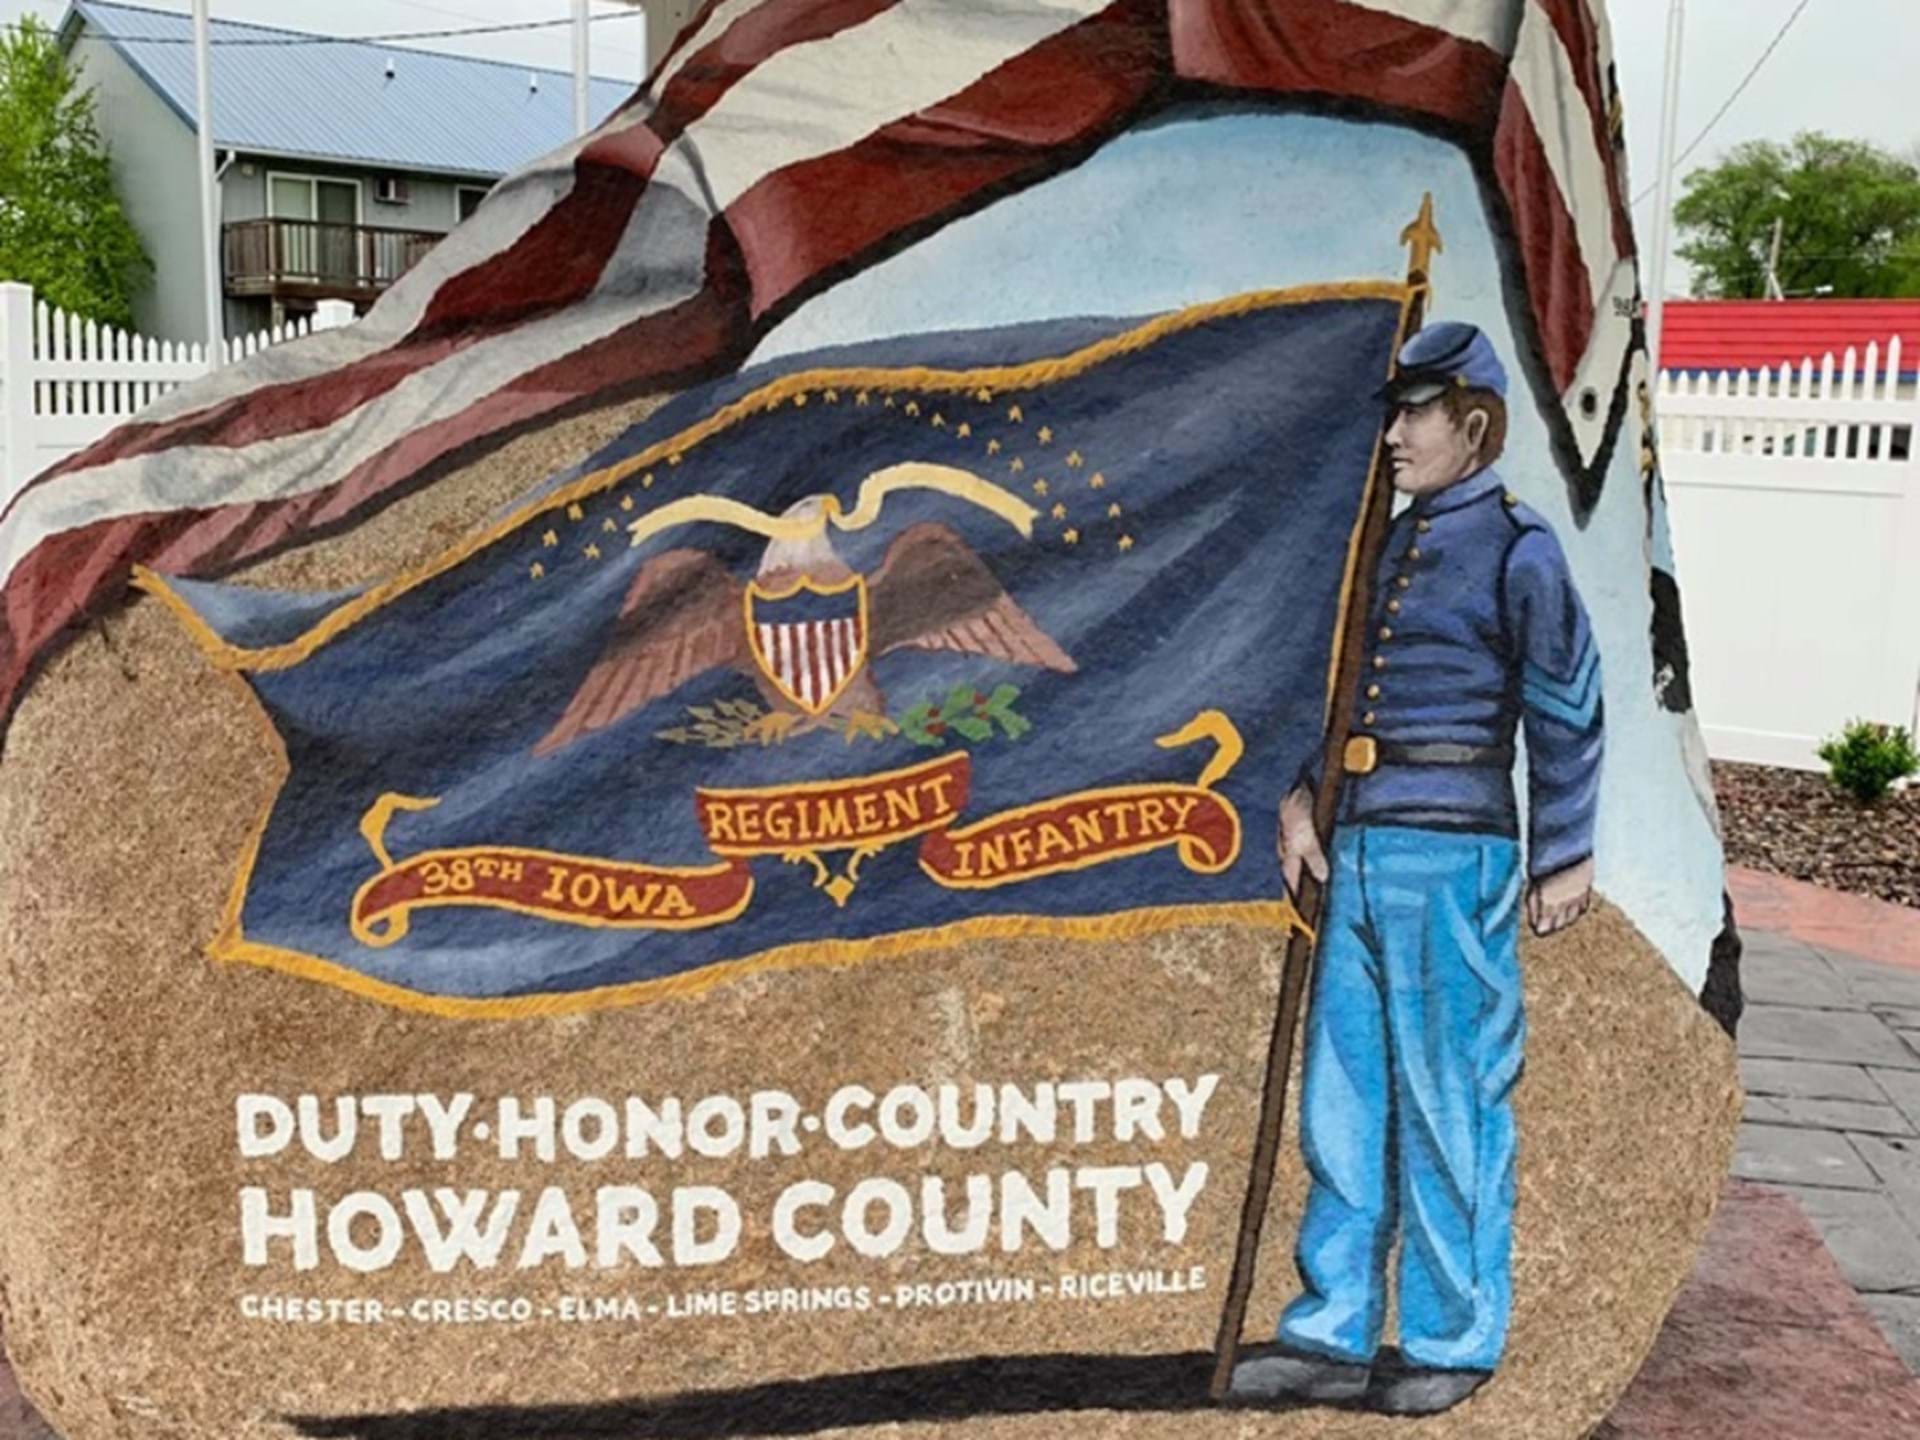 Honoring one of the best intact hand sewn flags from Civil War